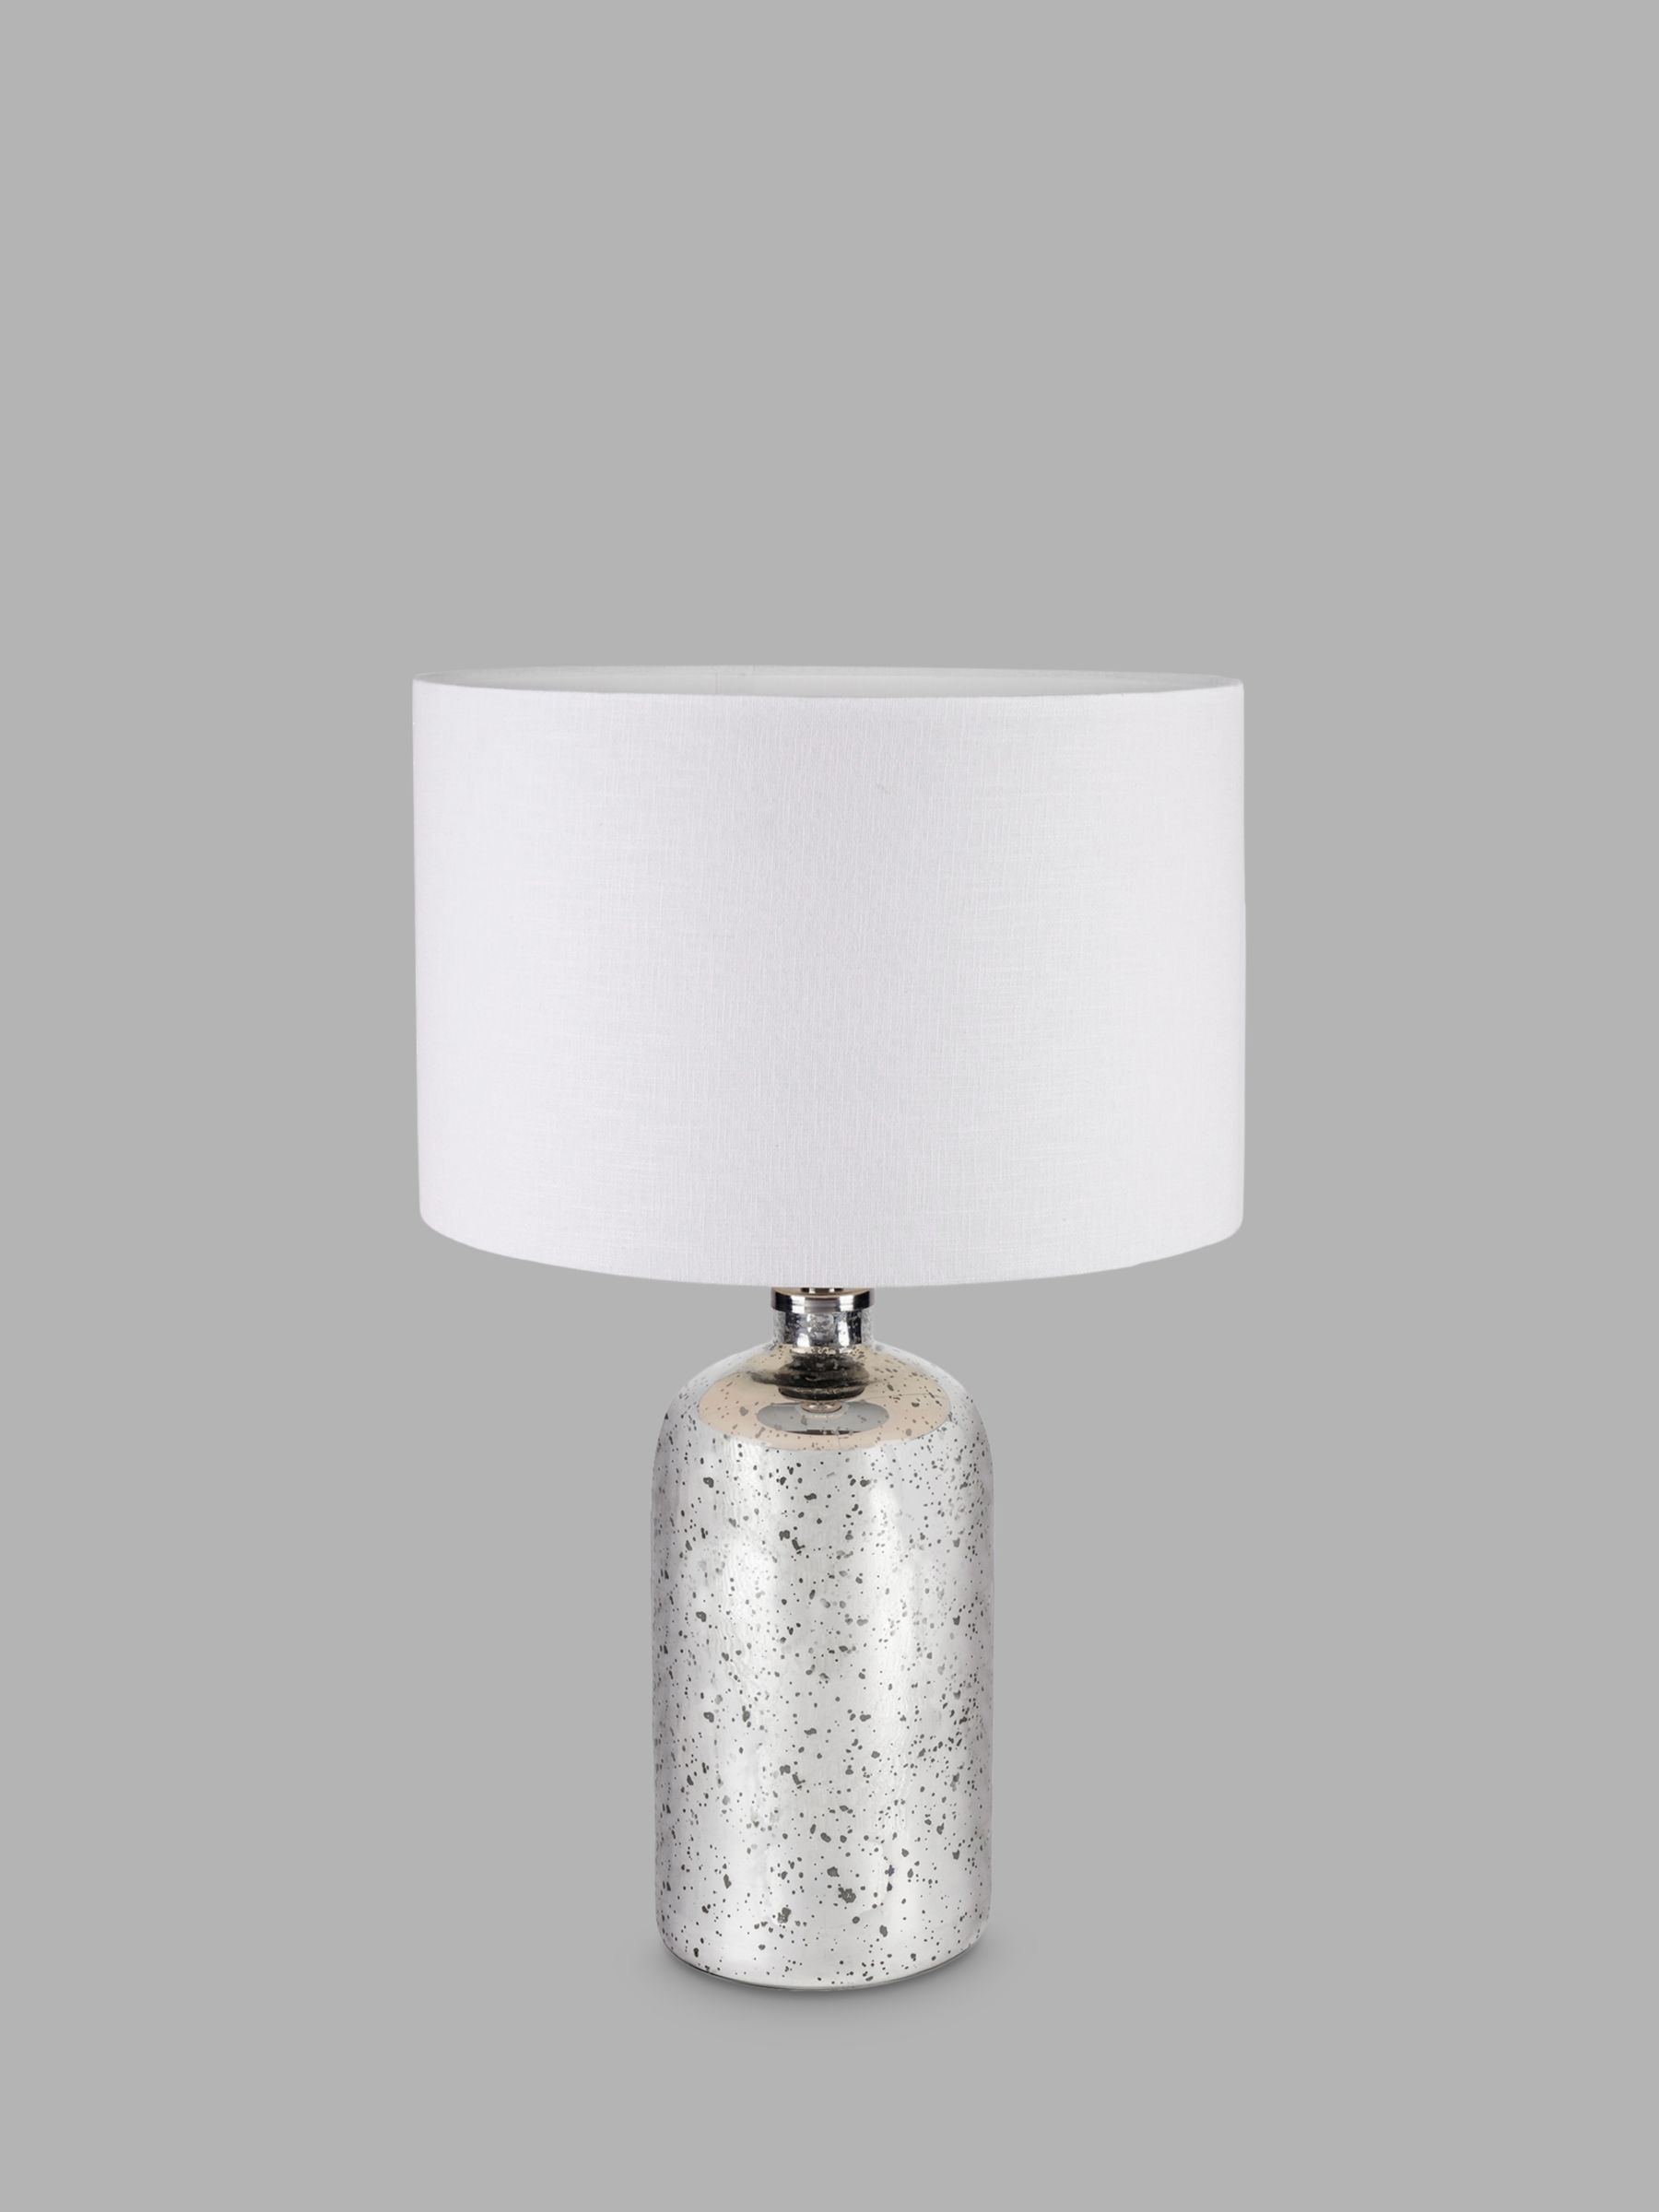 Photo of Pacific lifestyle ophelia mercurial glass table lamp silver